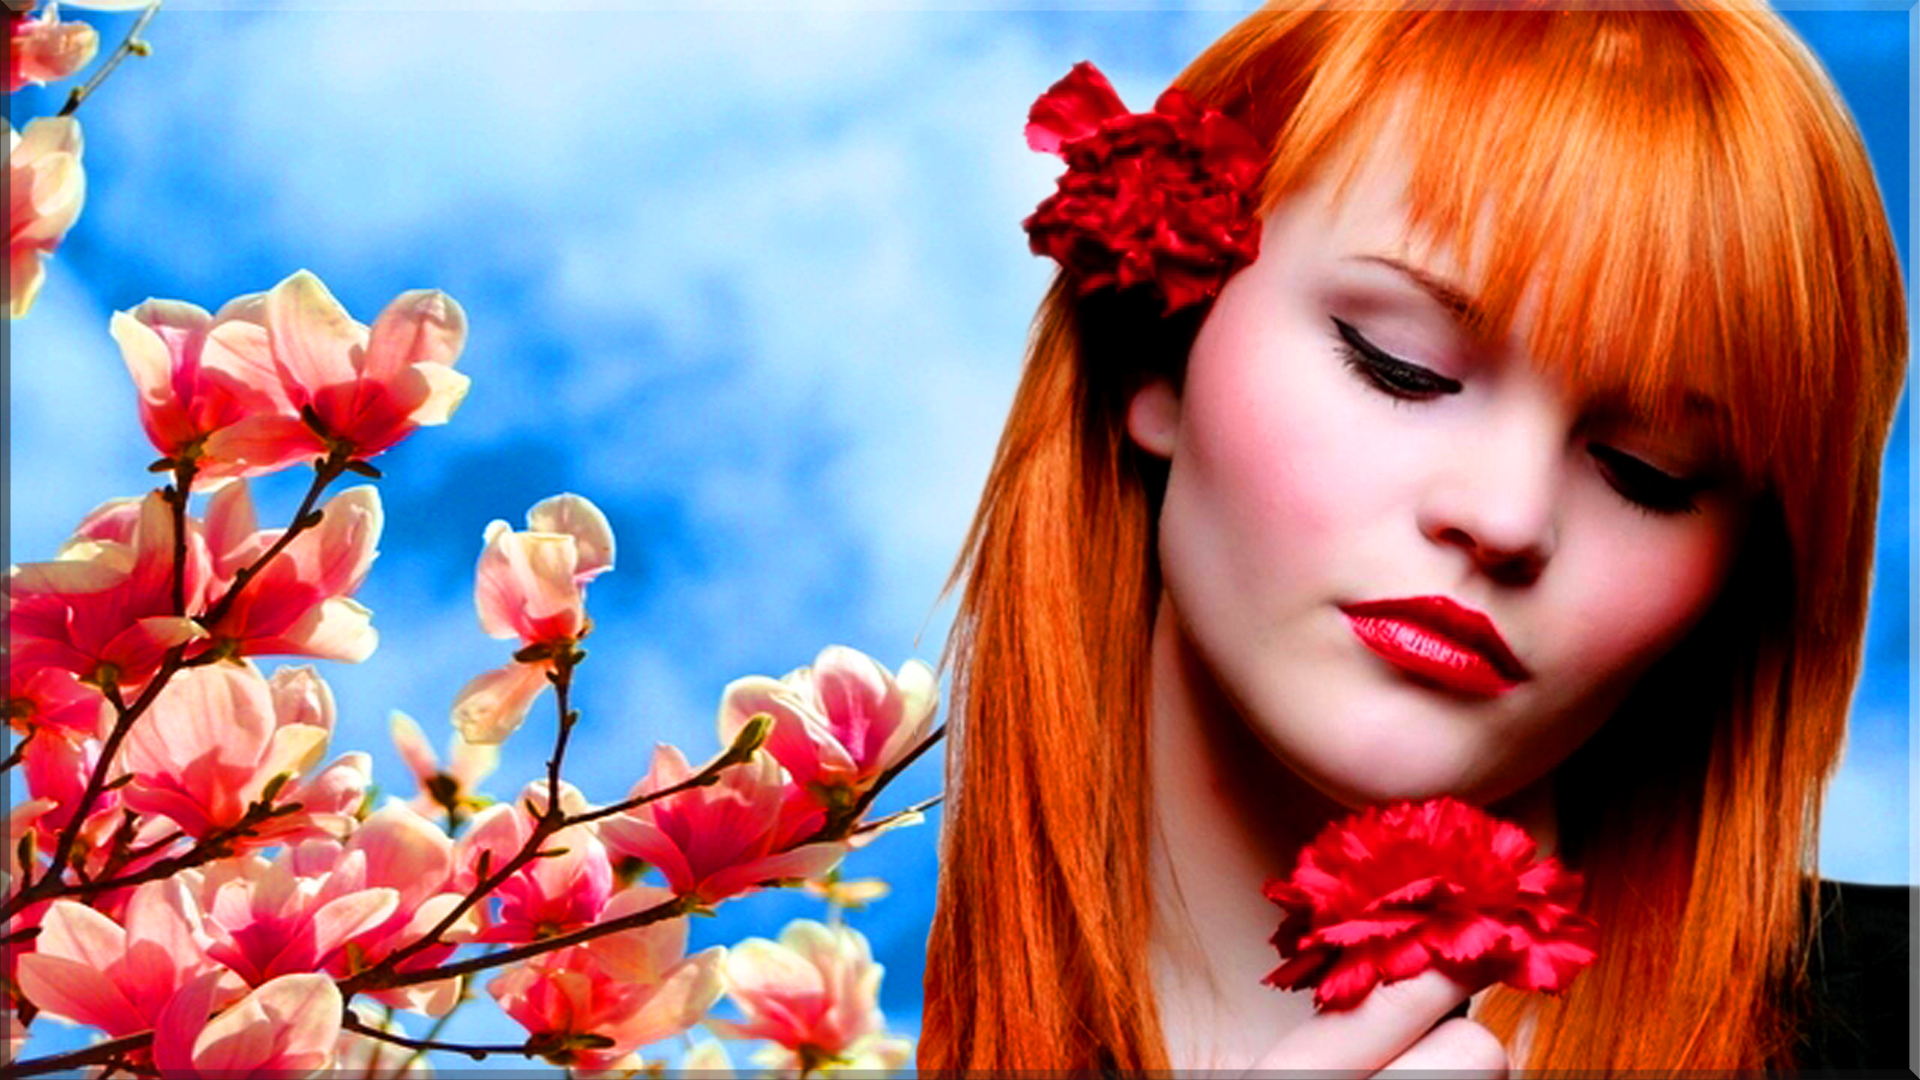 Redhead With Flowers Hd Wallpaper Background Image 1920x1080 Id 375529 Wallpaper Abyss